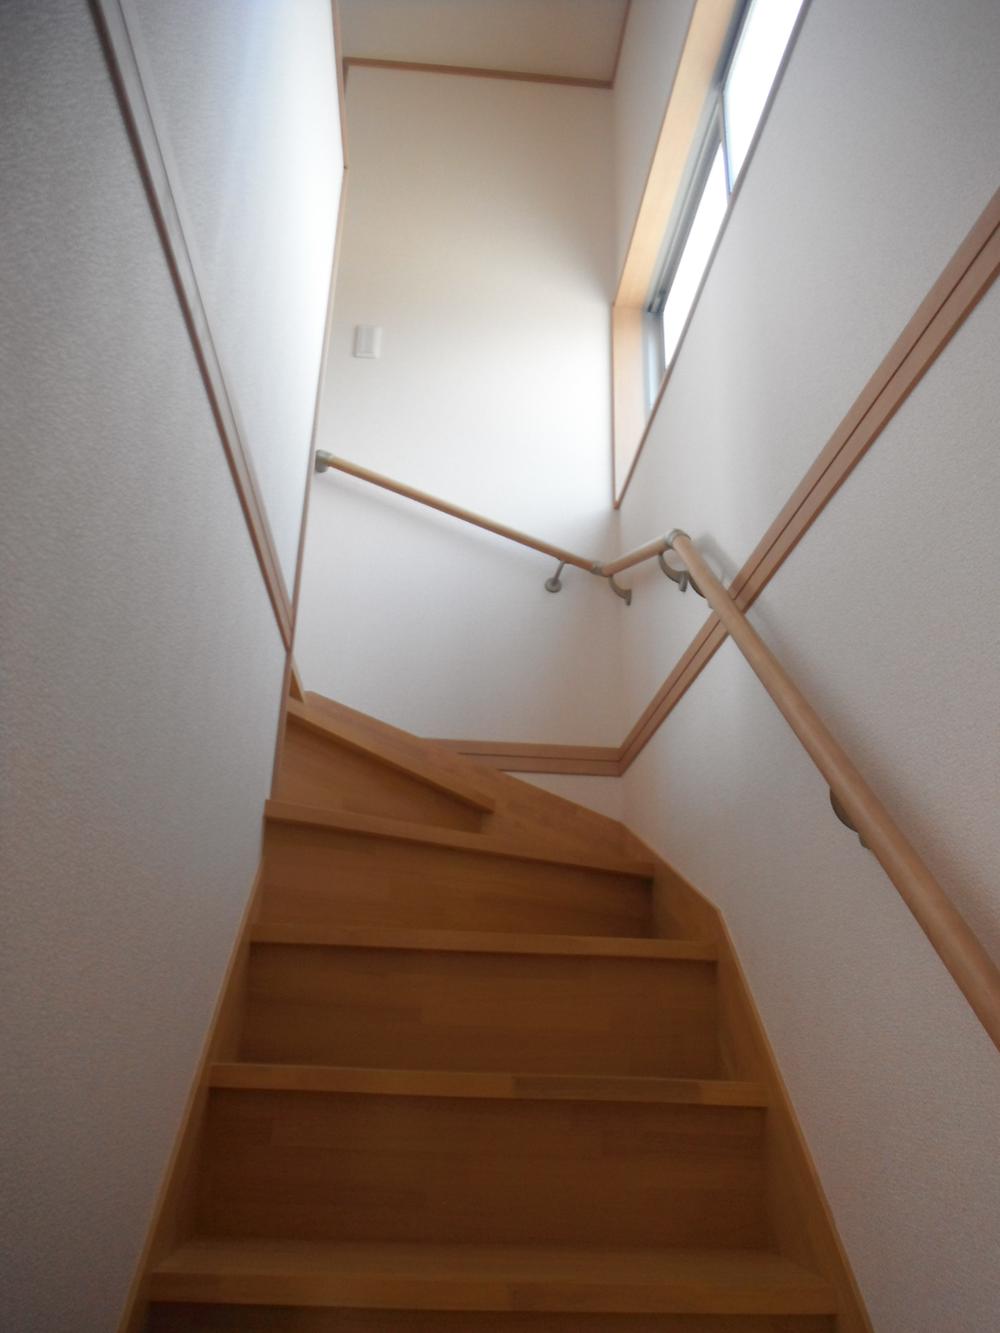 Other introspection. Convenient handrail with stairs <is a complete image>